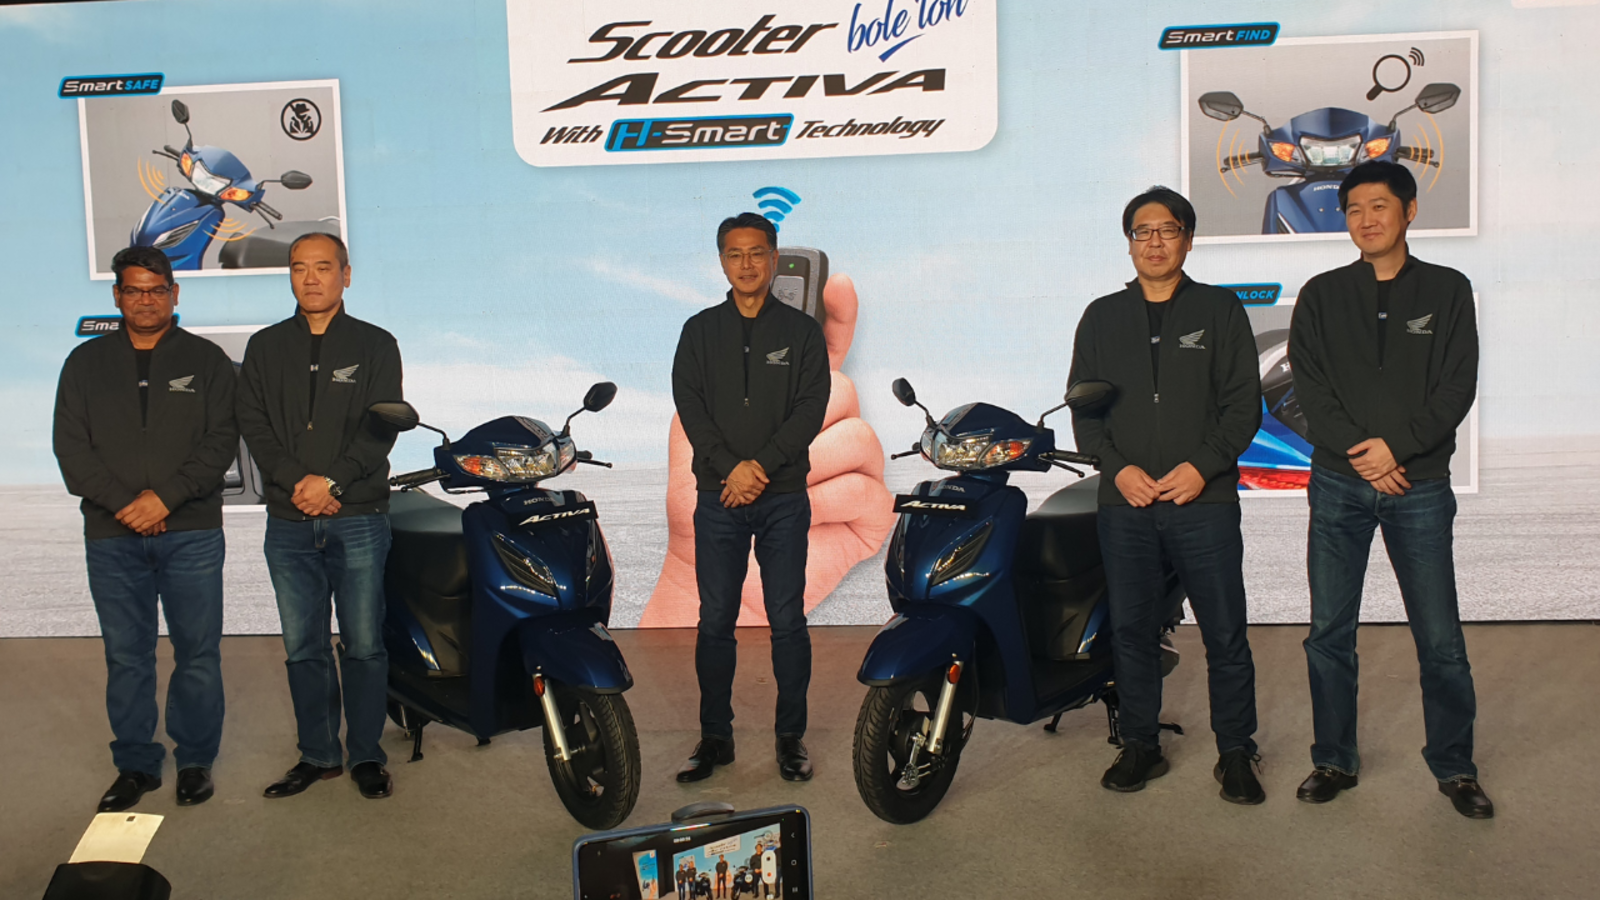 Honda Activa 6G Smart scooter launched with new features; priced